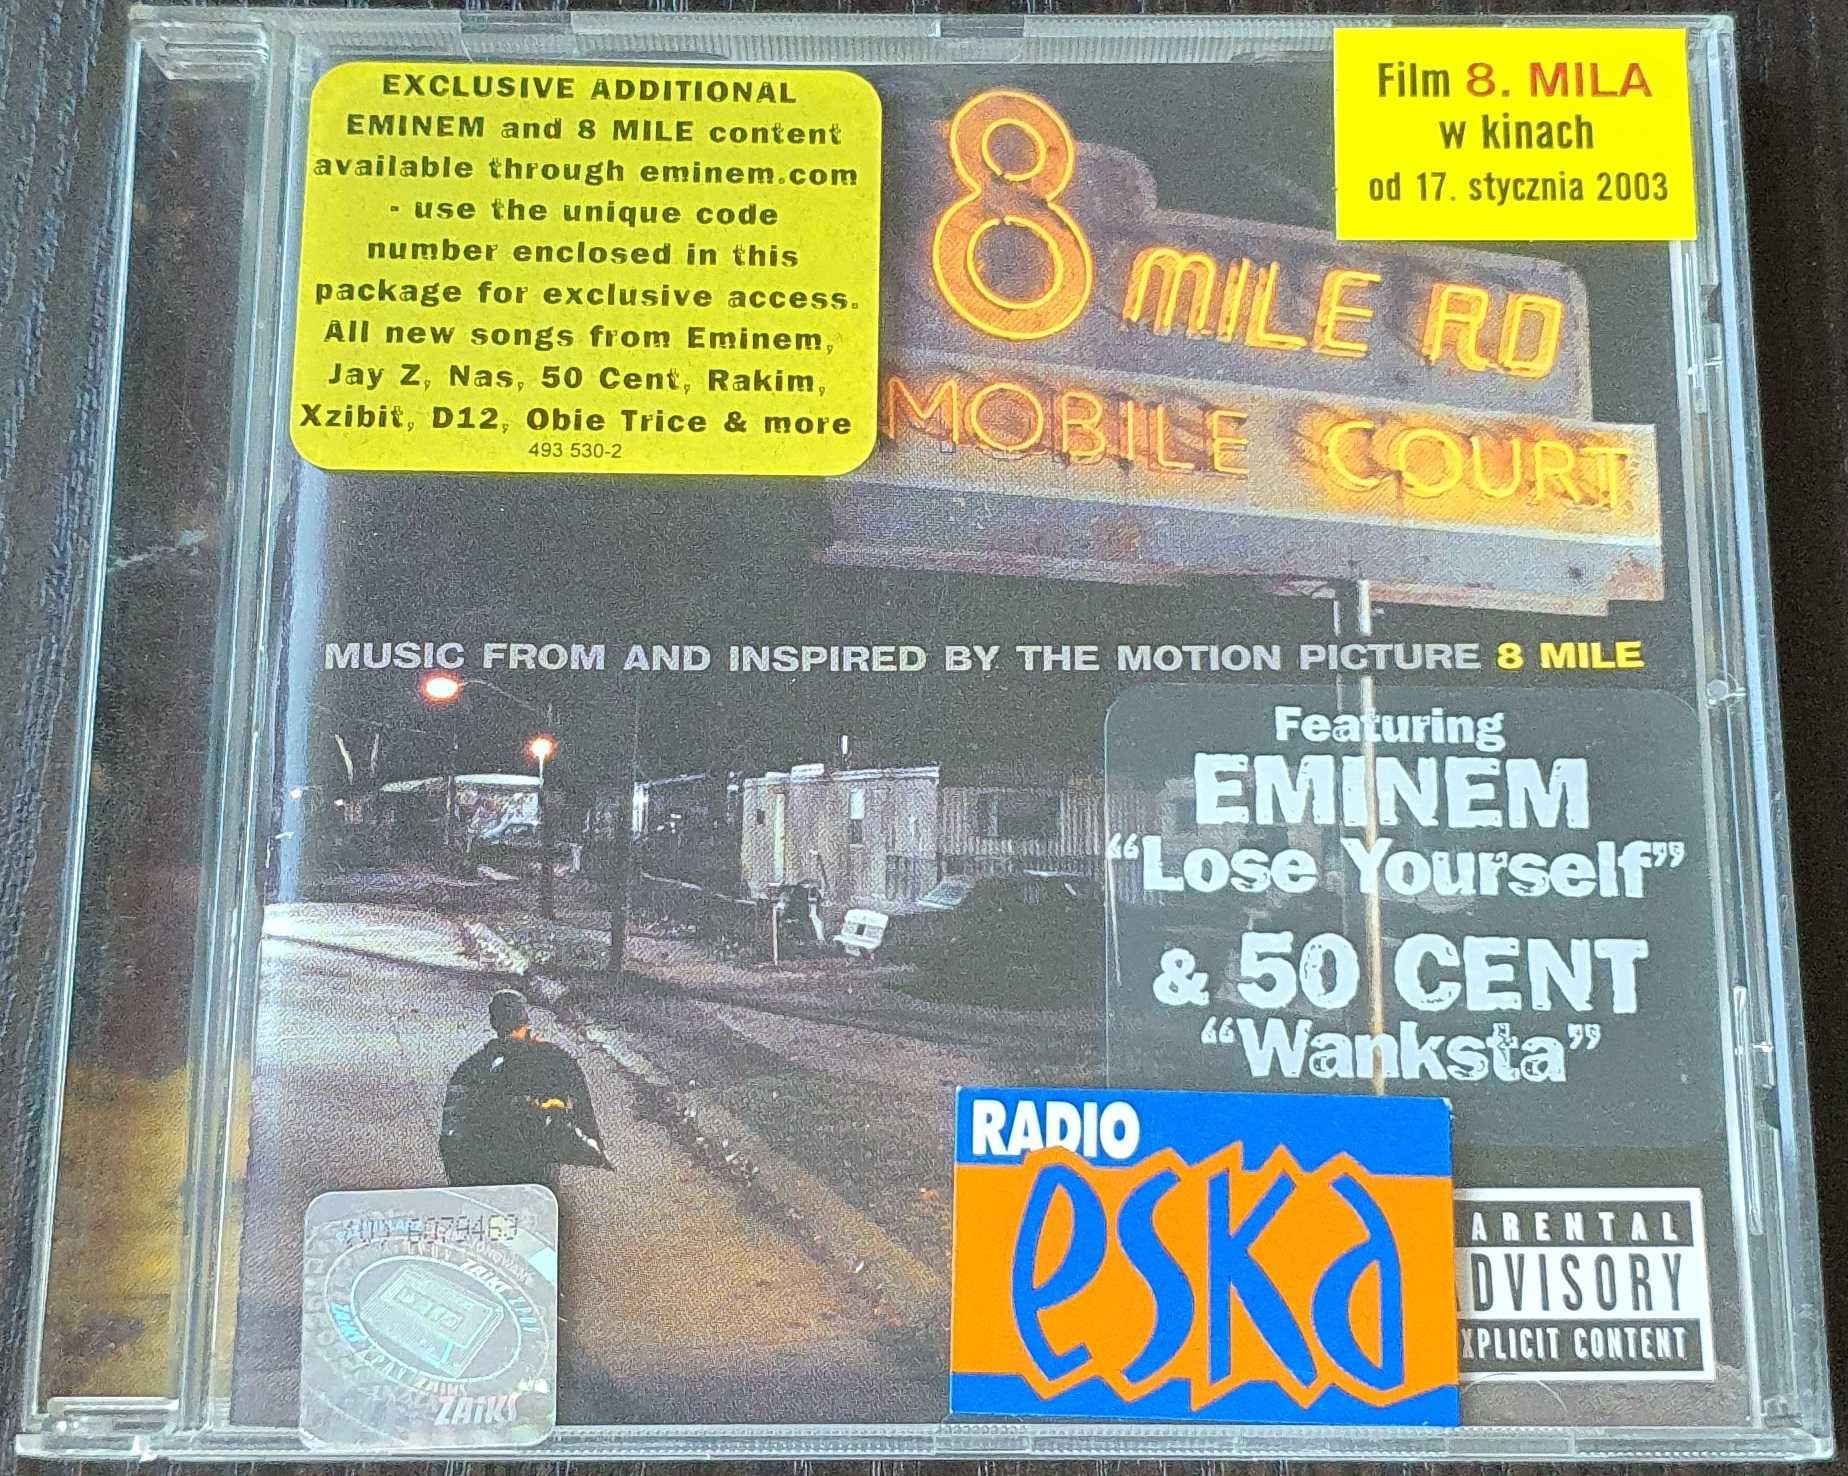 Music From And Inspired By The Motion Picture 8 Mile (Eminem i inni)